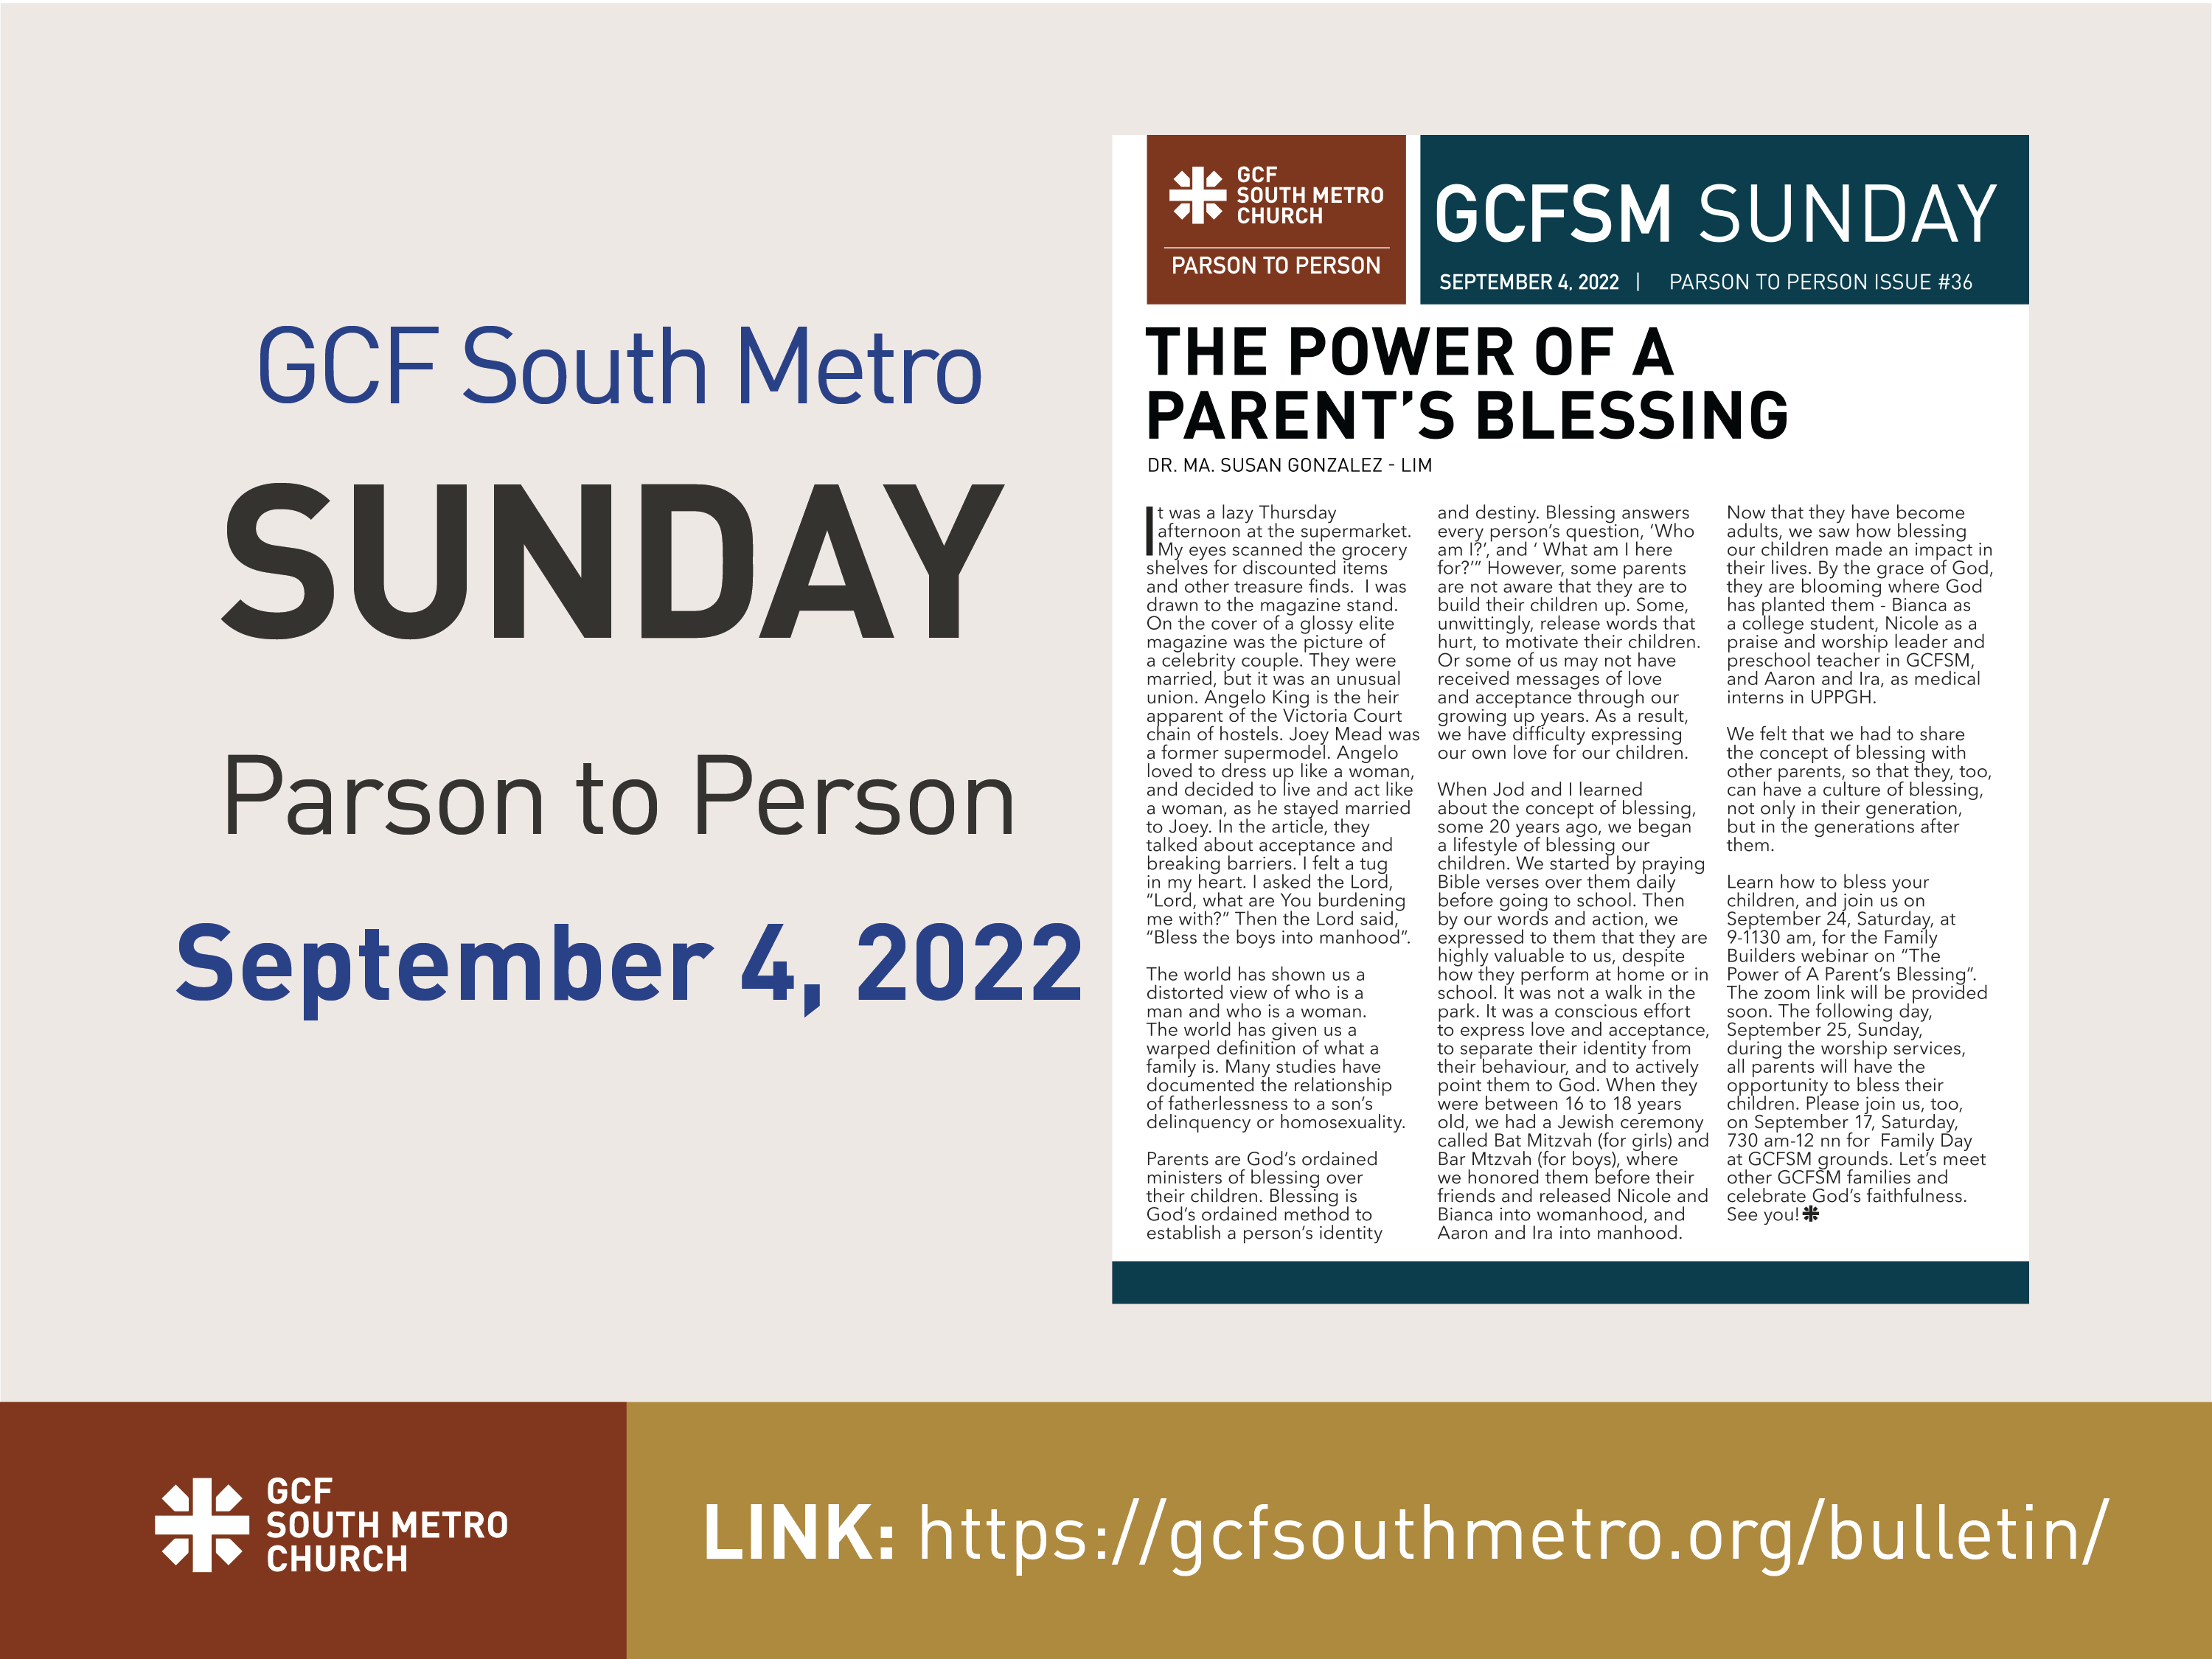 Sunday Bulletin – Parson to Person, September 4, 2022